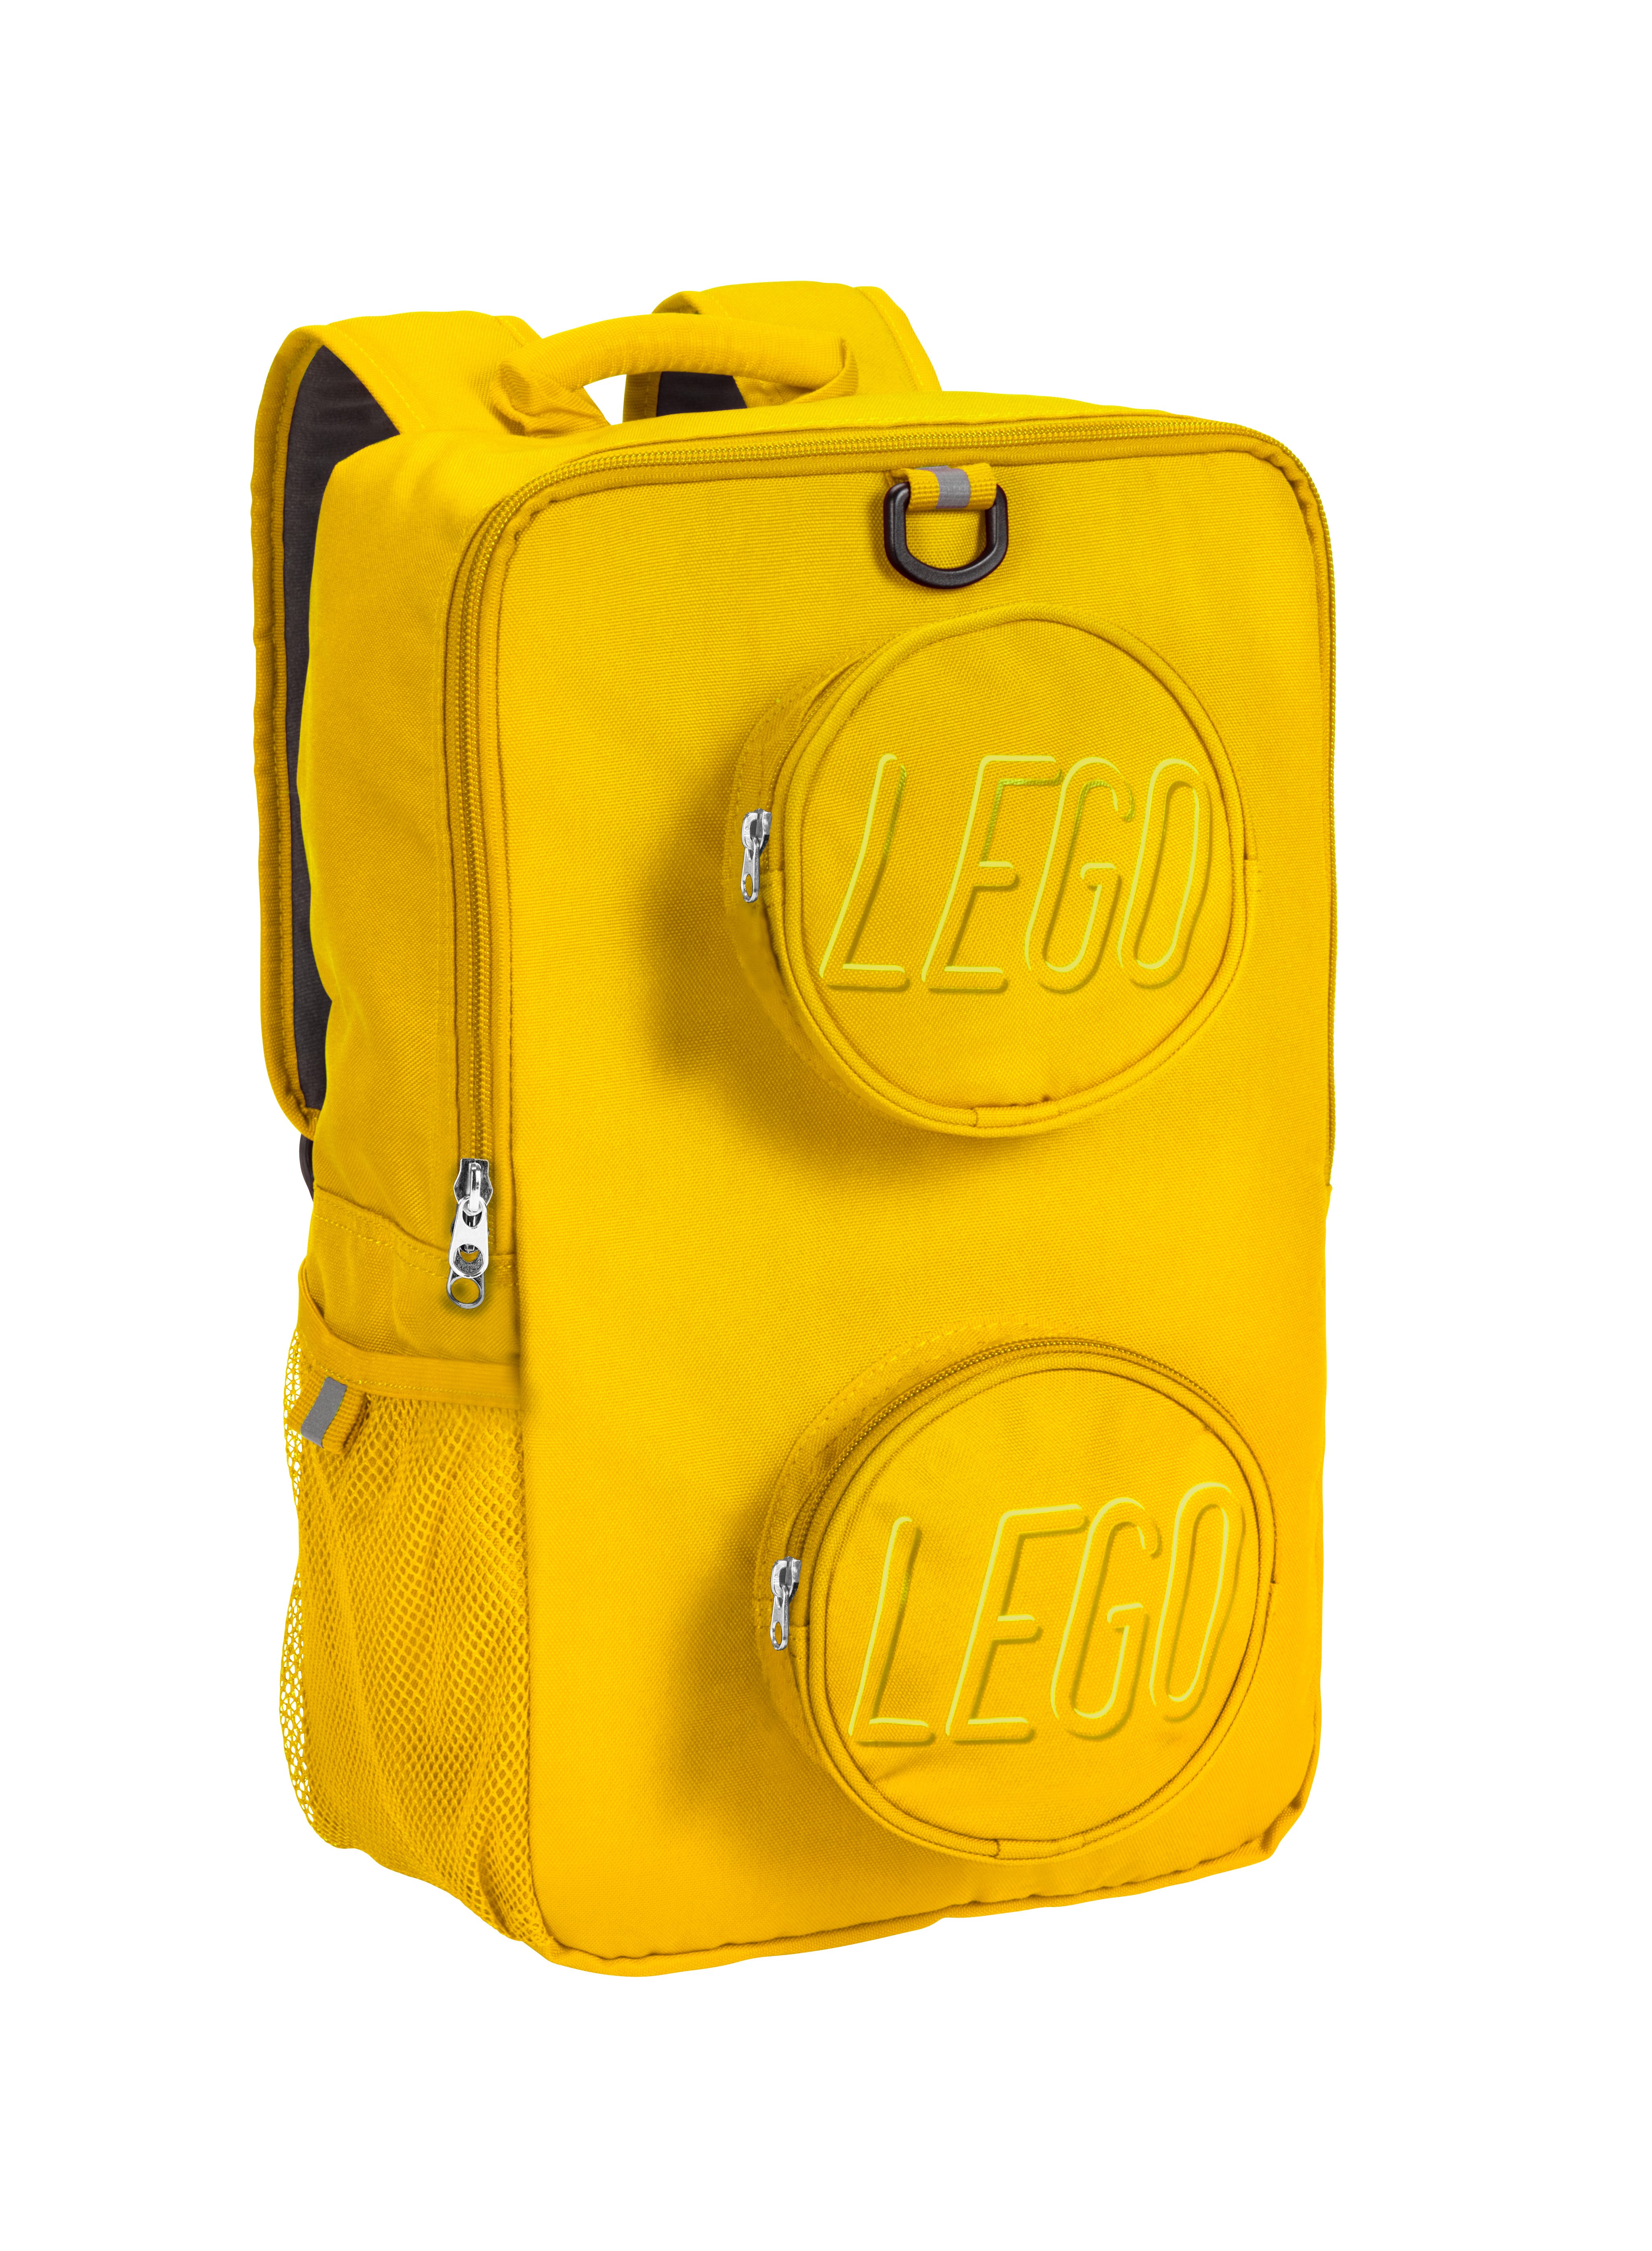 yellow building block backpack with LEGO logo.